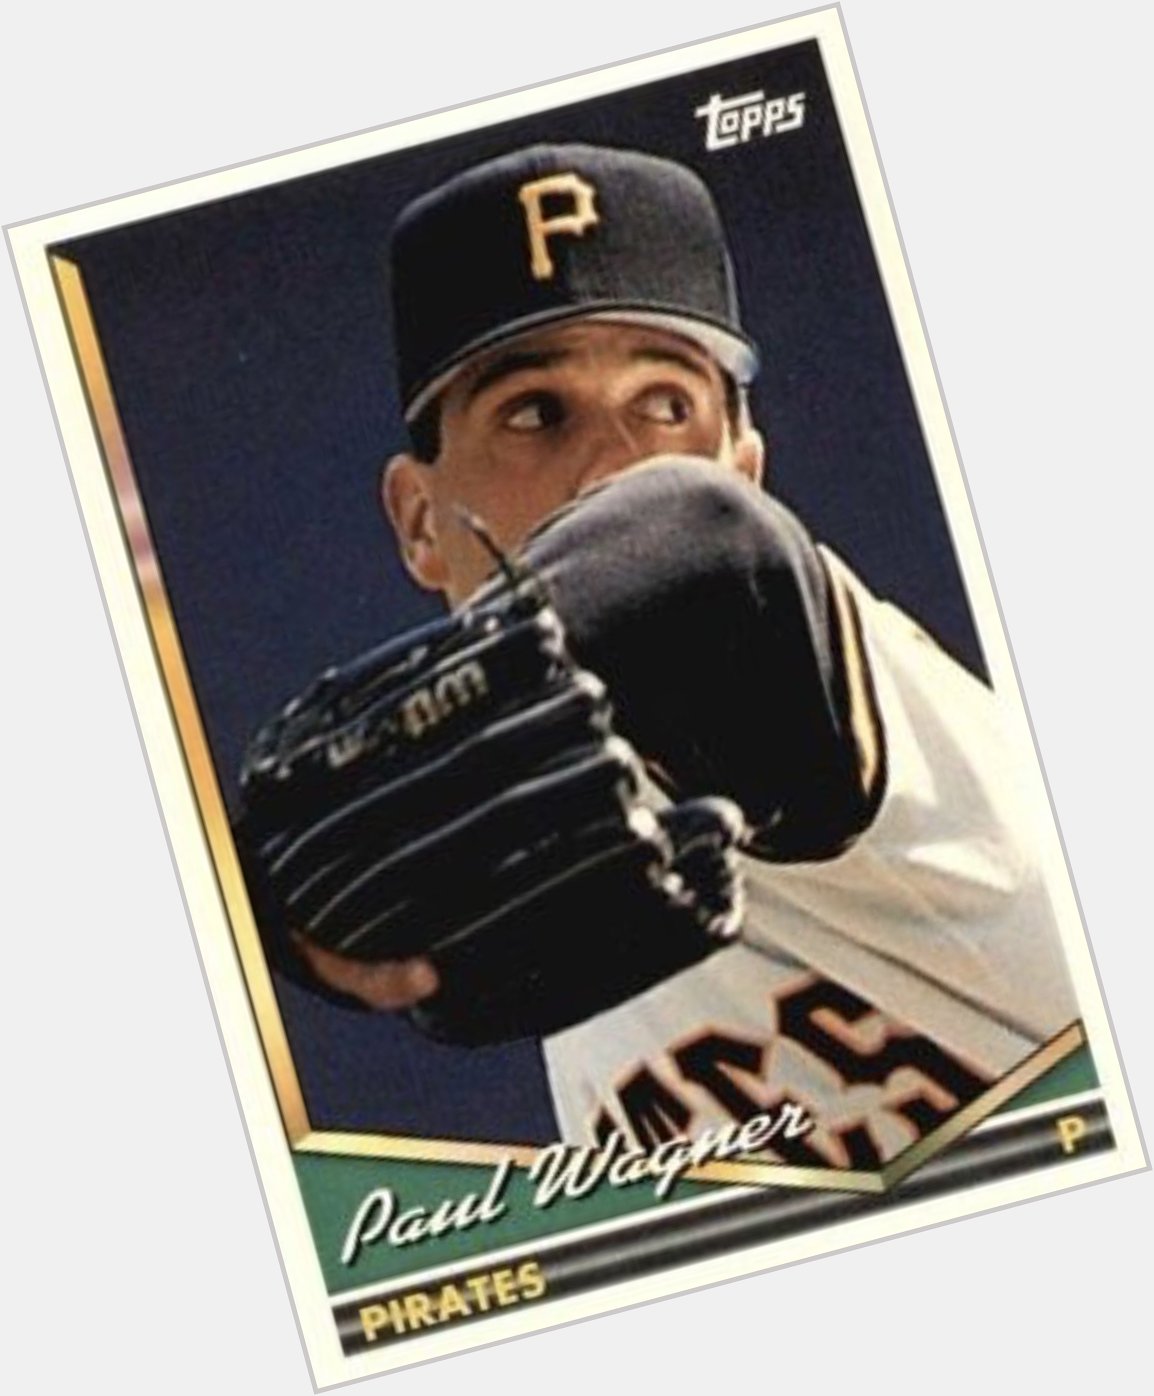 Happy 50th Birthday to Paul Wagner, who was 8-4, with a 3.82 ERA in 23 starts for the 1999  